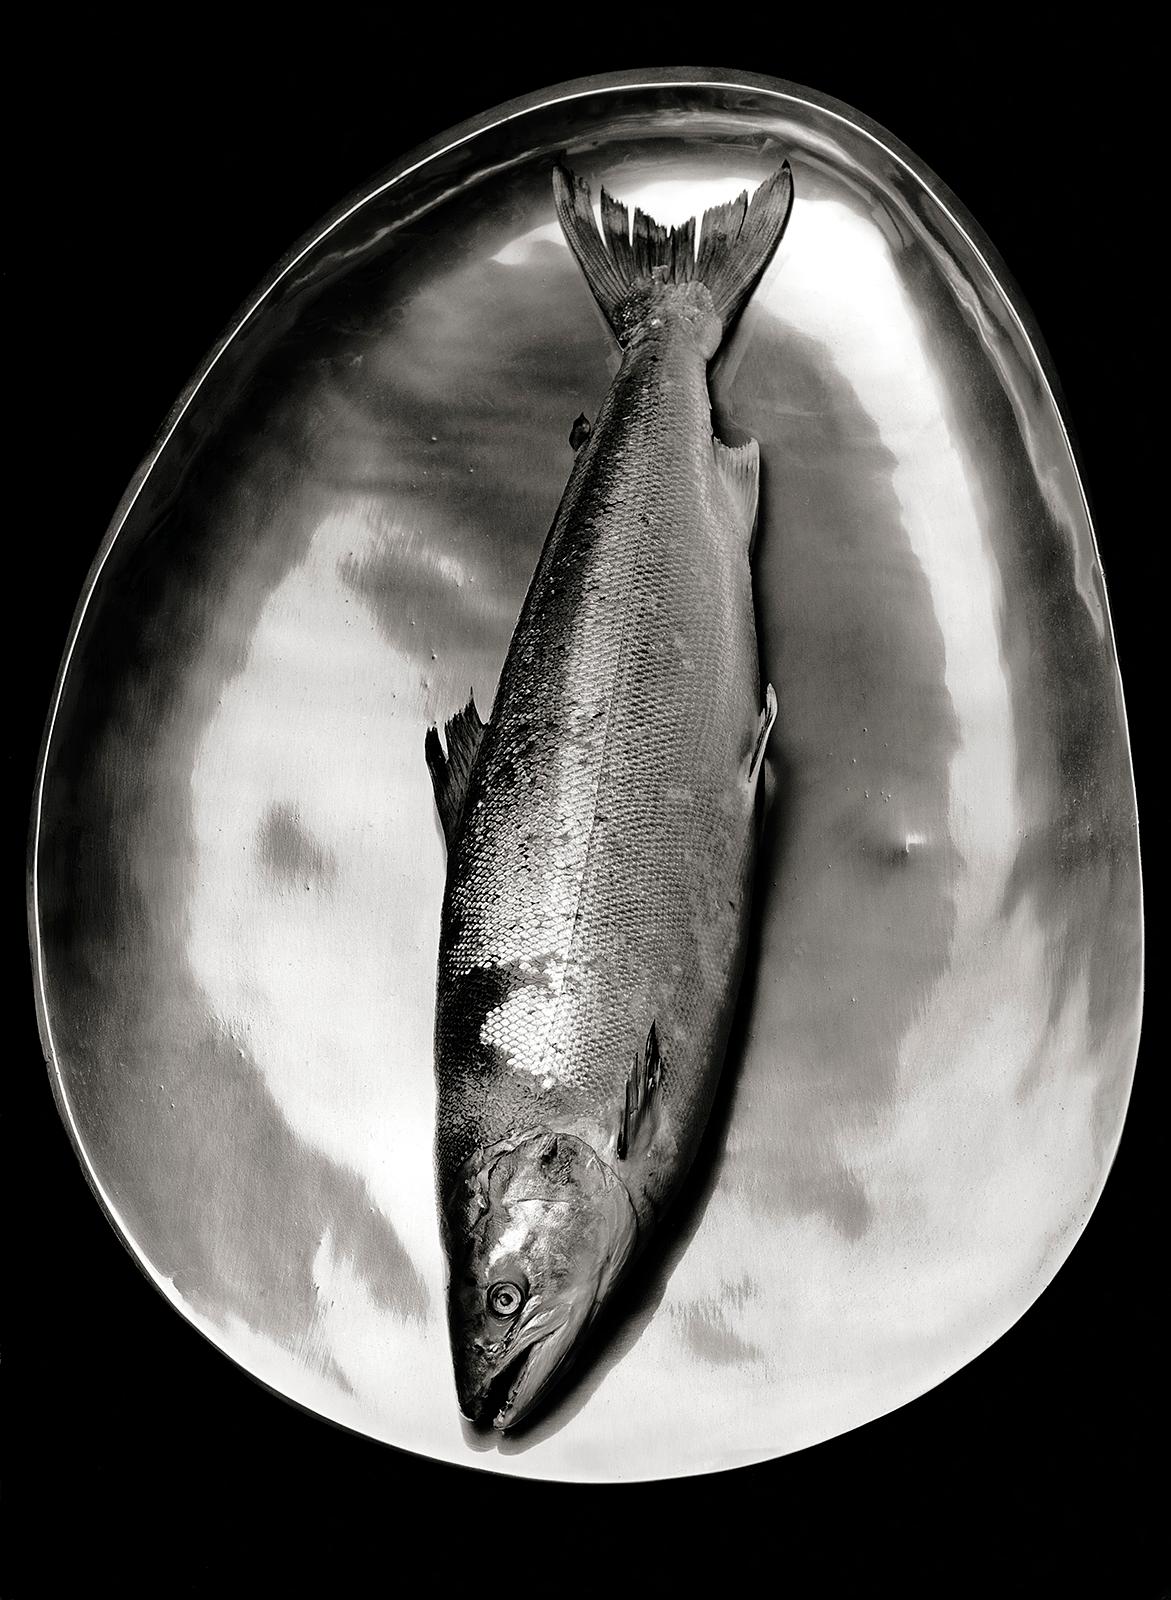 Salmon-Signed limited edition fine art print, Black and white photo,Analog